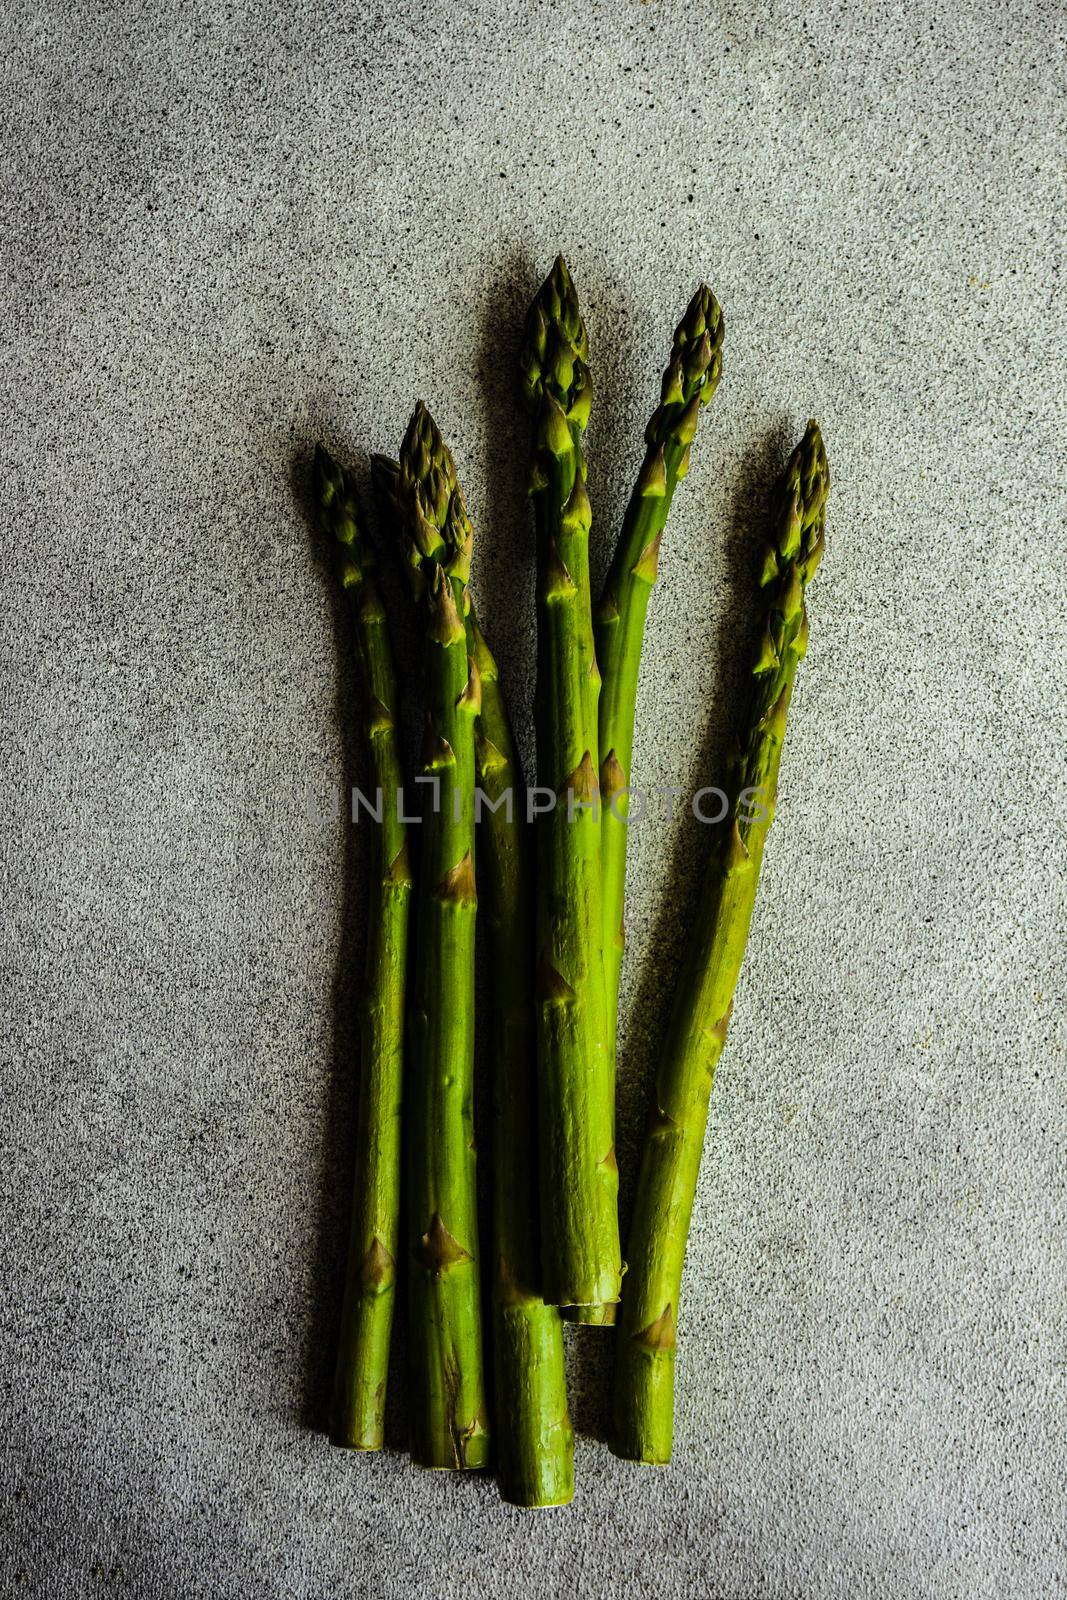 Fresh asparagus plant ready for cooking by Elet